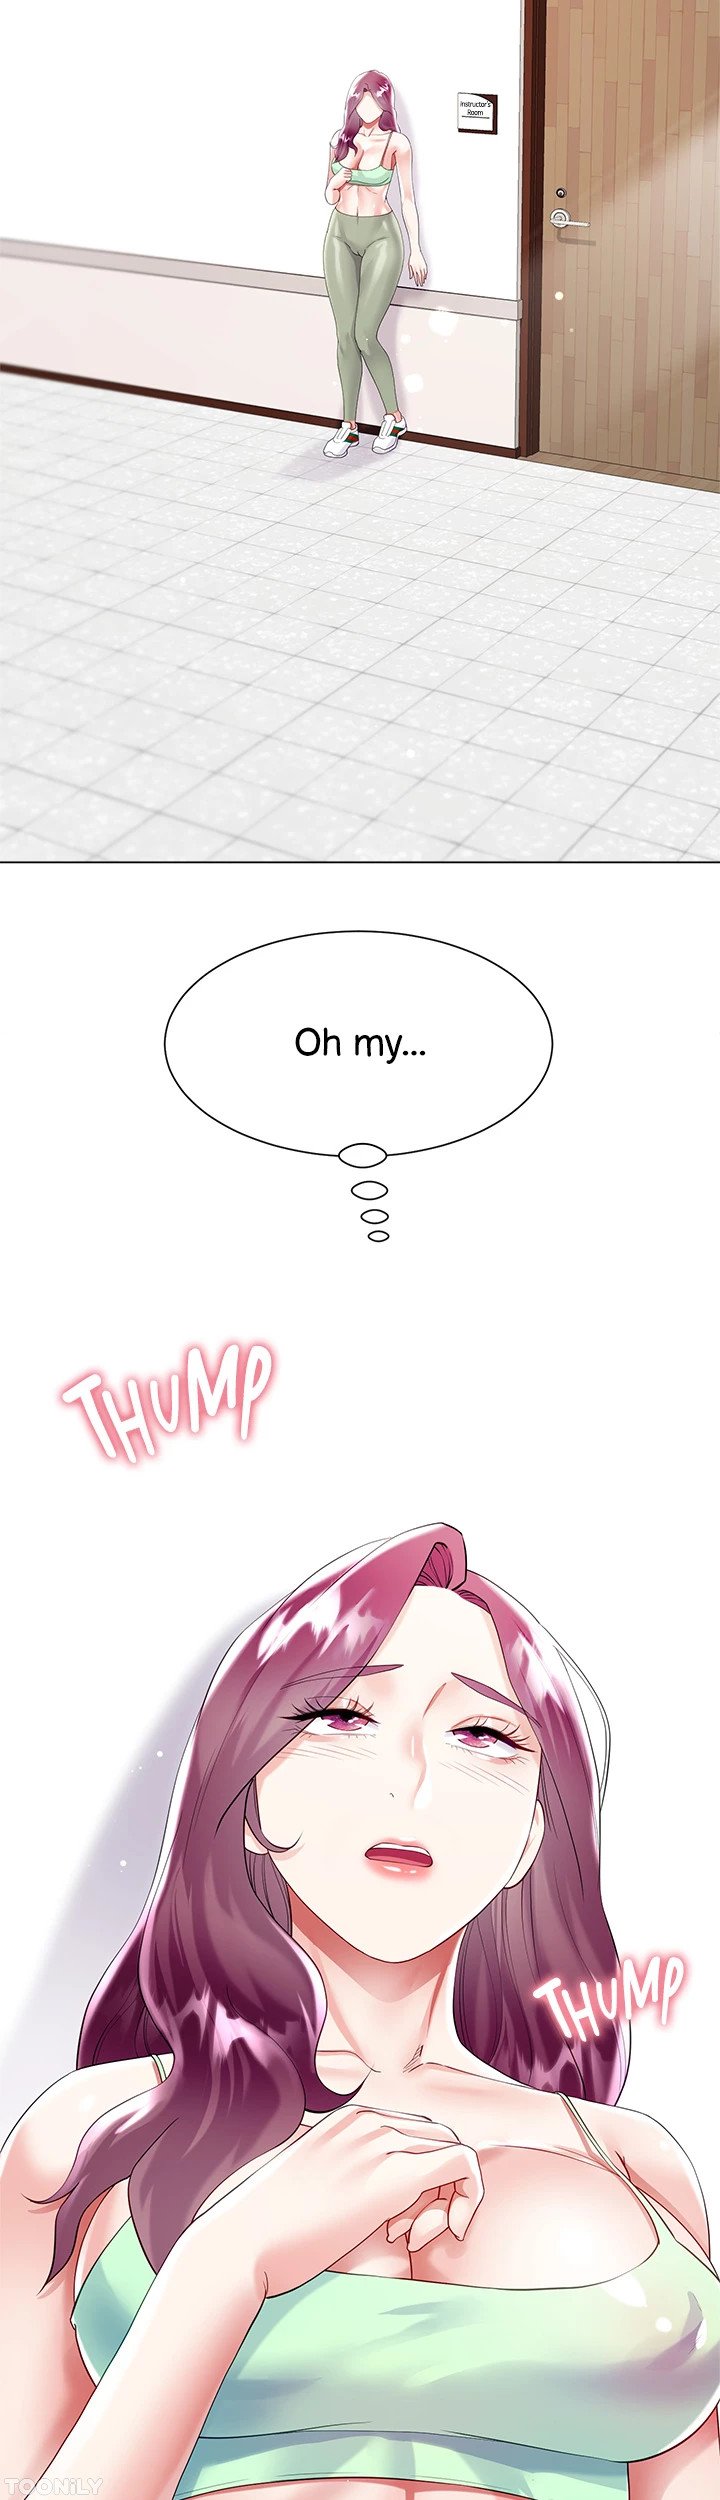 my-sister-in-laws-skirt-chap-45-44